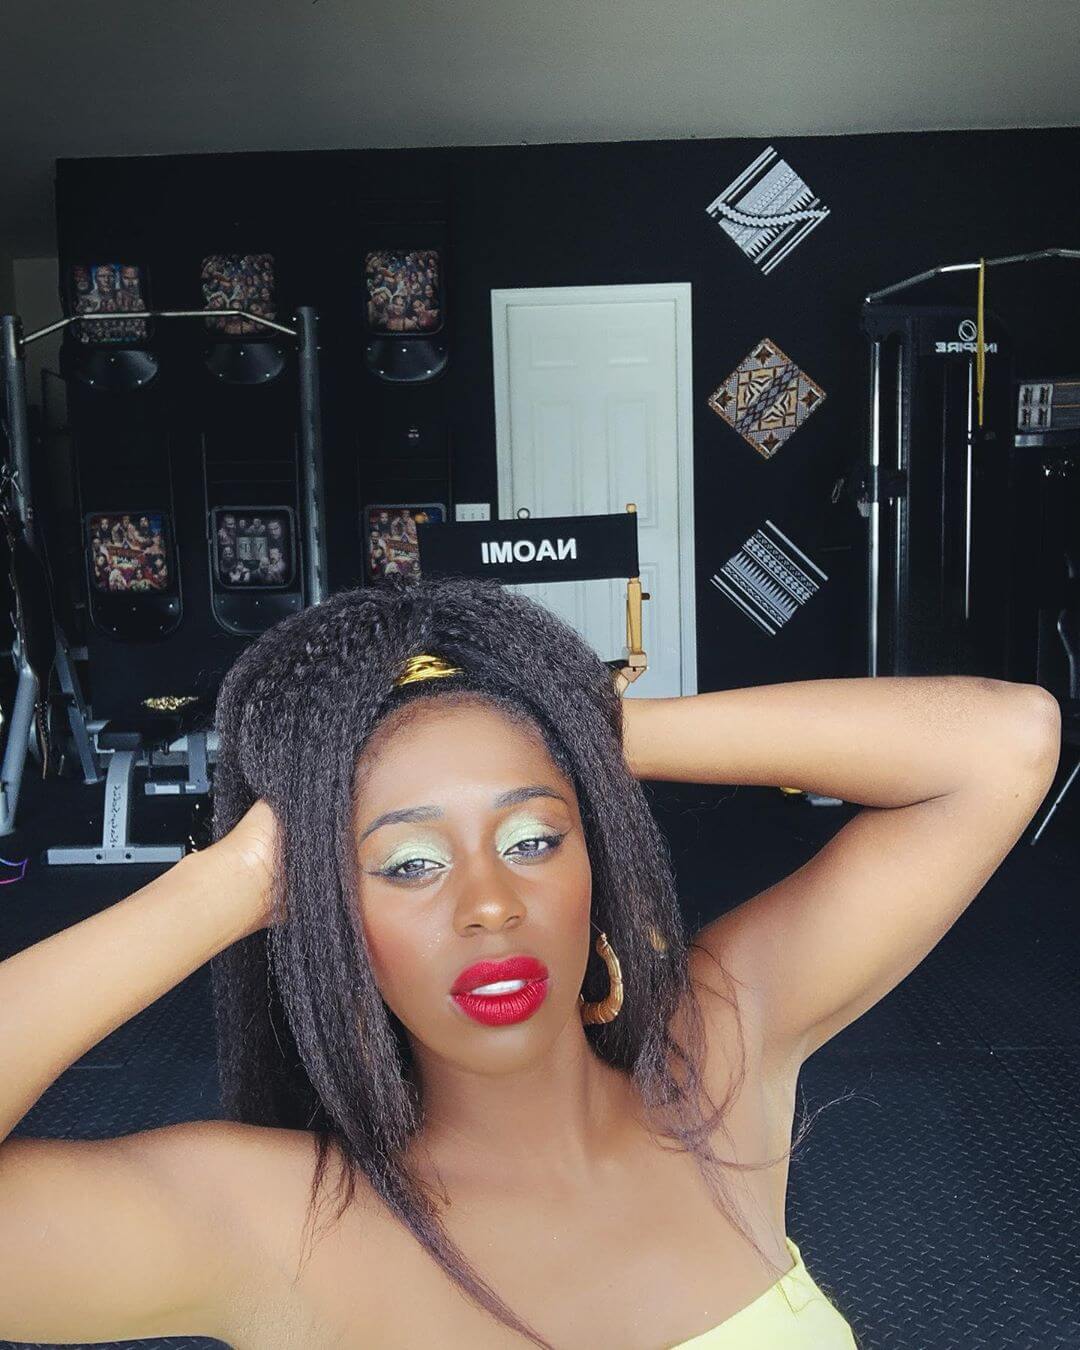 70+ Hot Pictures Of Naomi a.k.a Trinity Fatu from WWE Will Leave You Gasping For Her 580